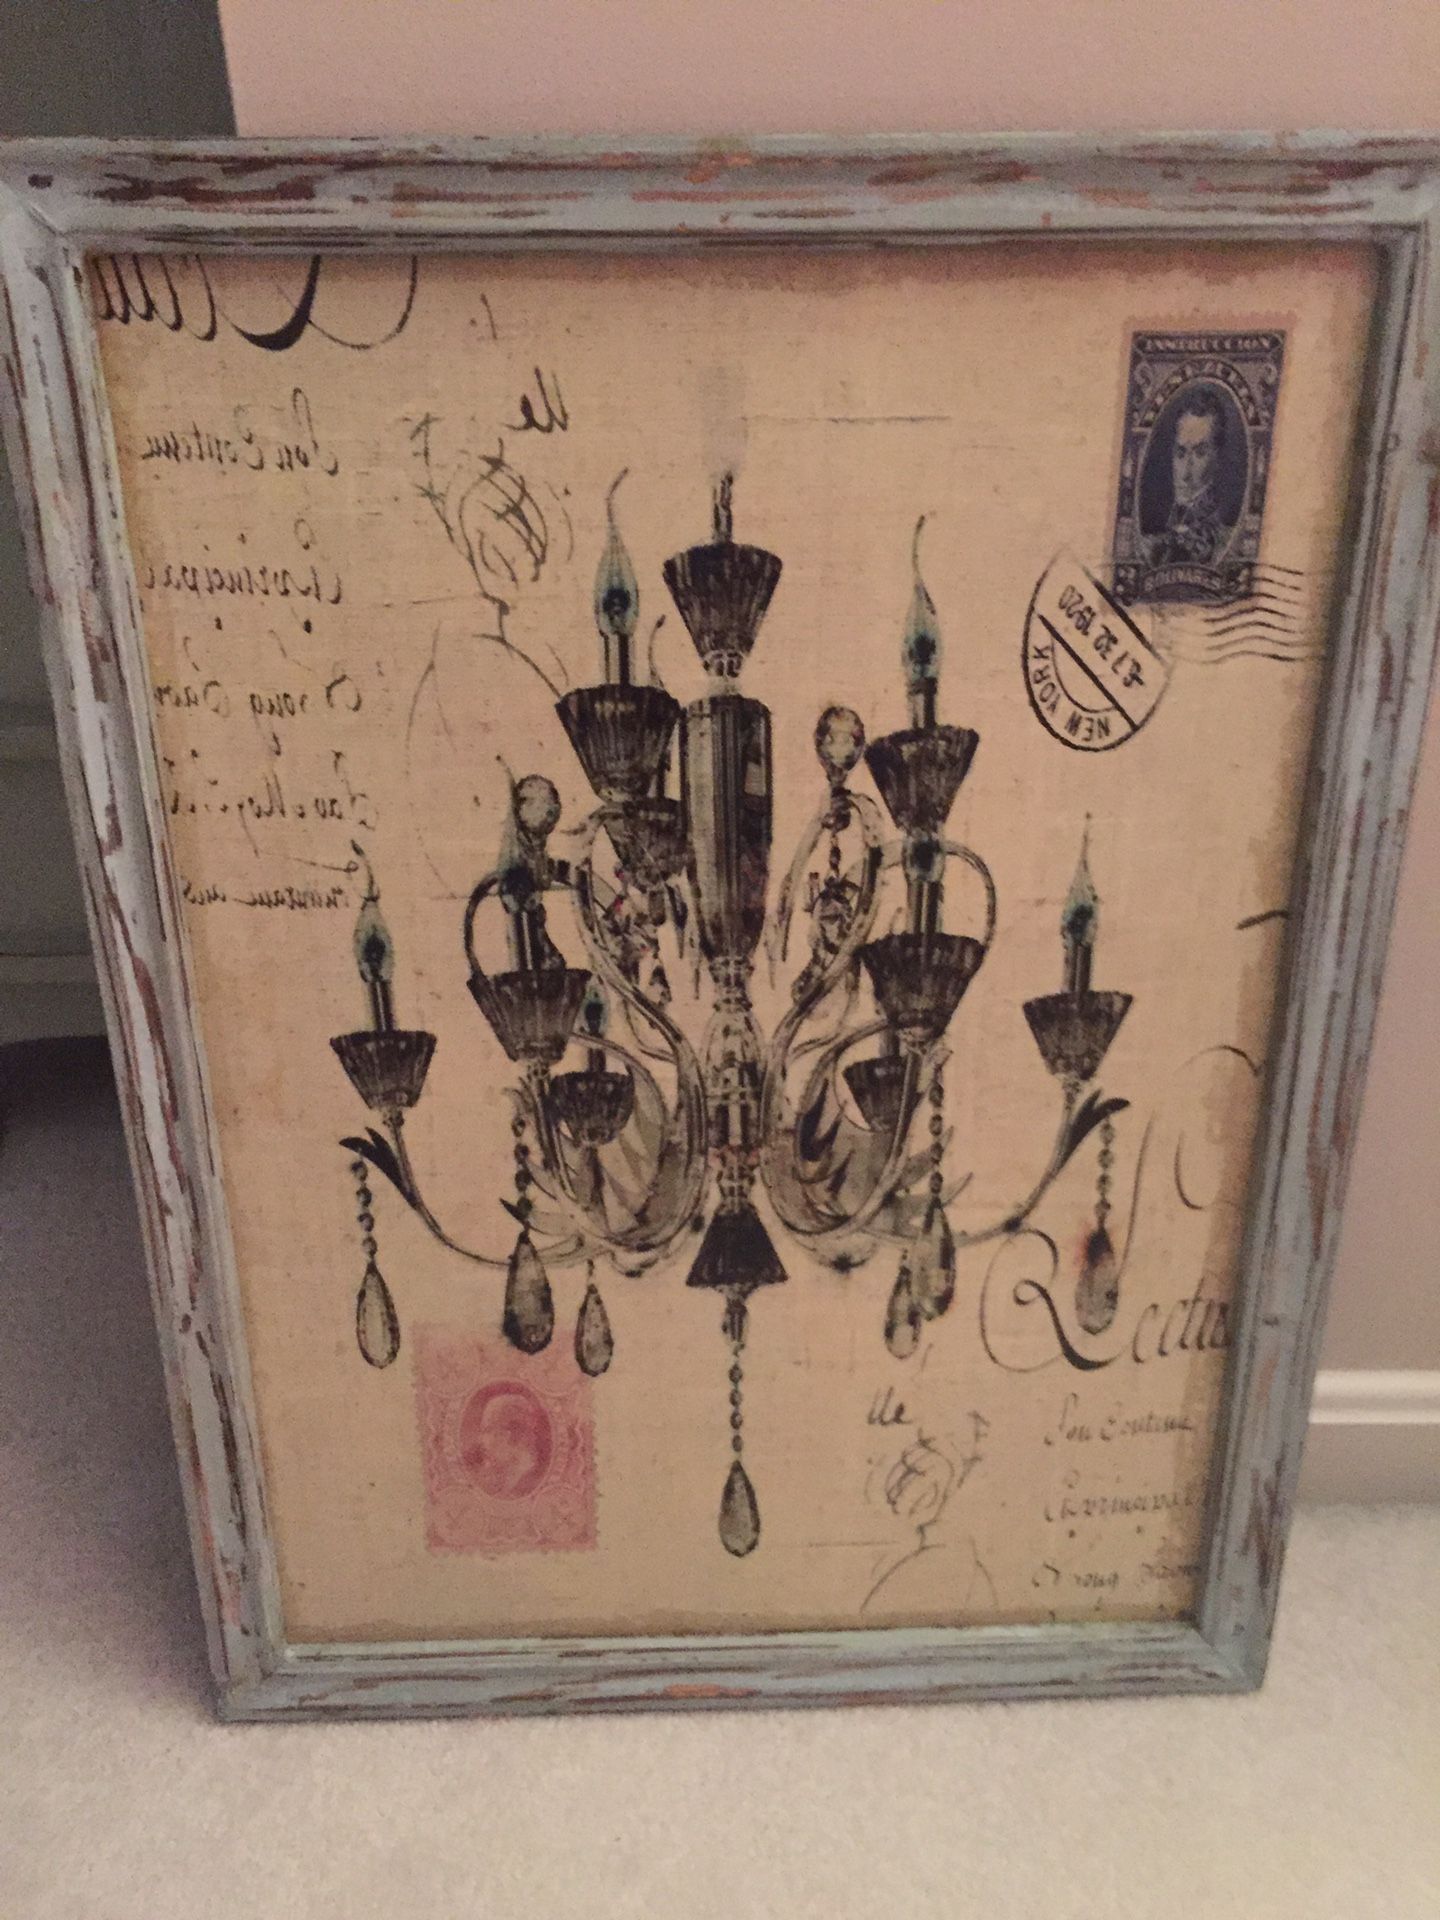 Chandelier art with distressed wood frame